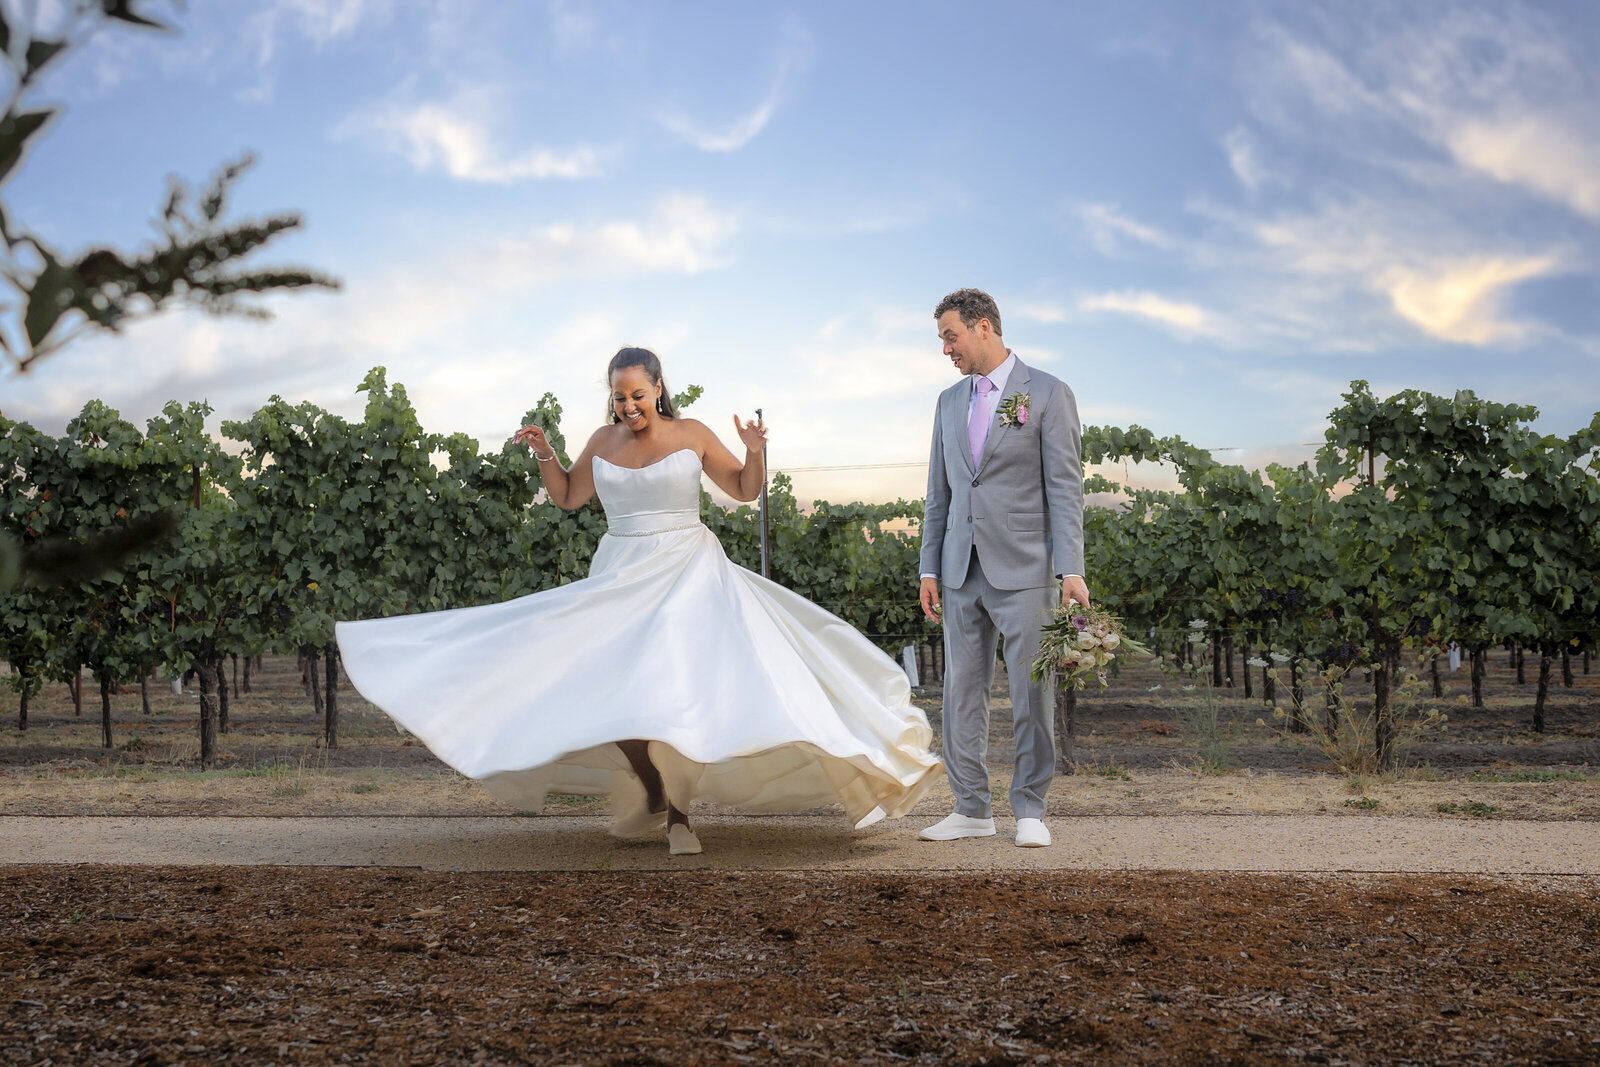 Sacramento wedding photographer capture bride twirling her dress in front of a vineyard and groom watches.